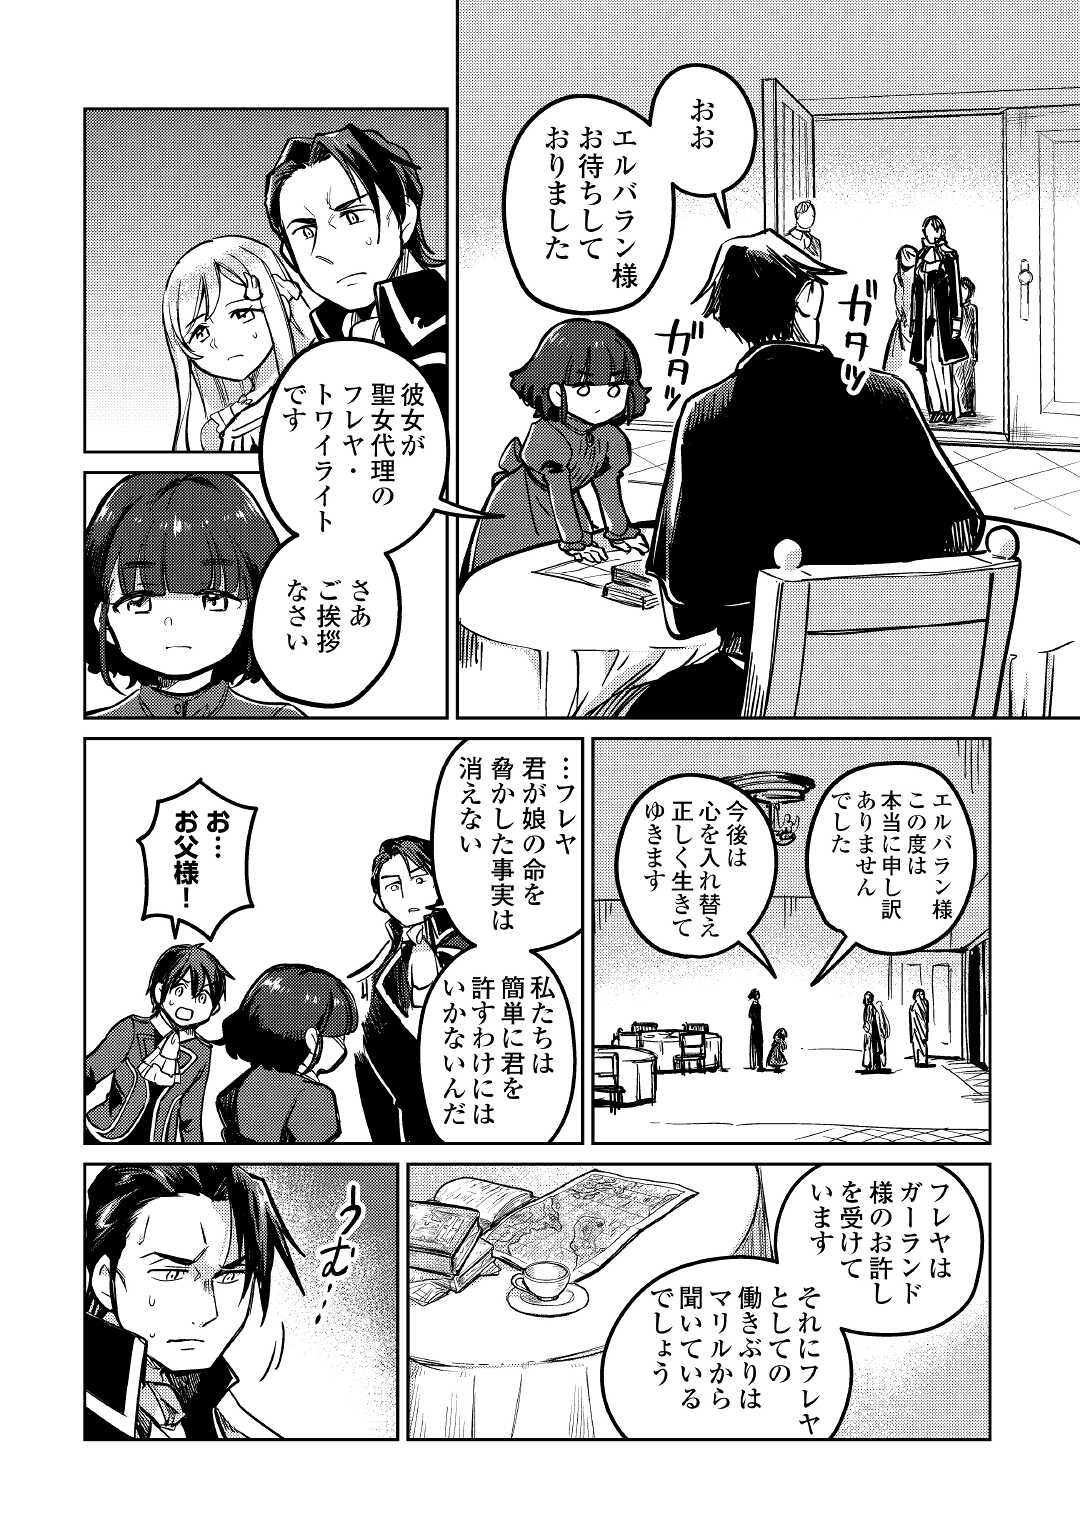 The Former Structural Researcher’s Story of Otherworldly Adventure 第42話 - Page 12